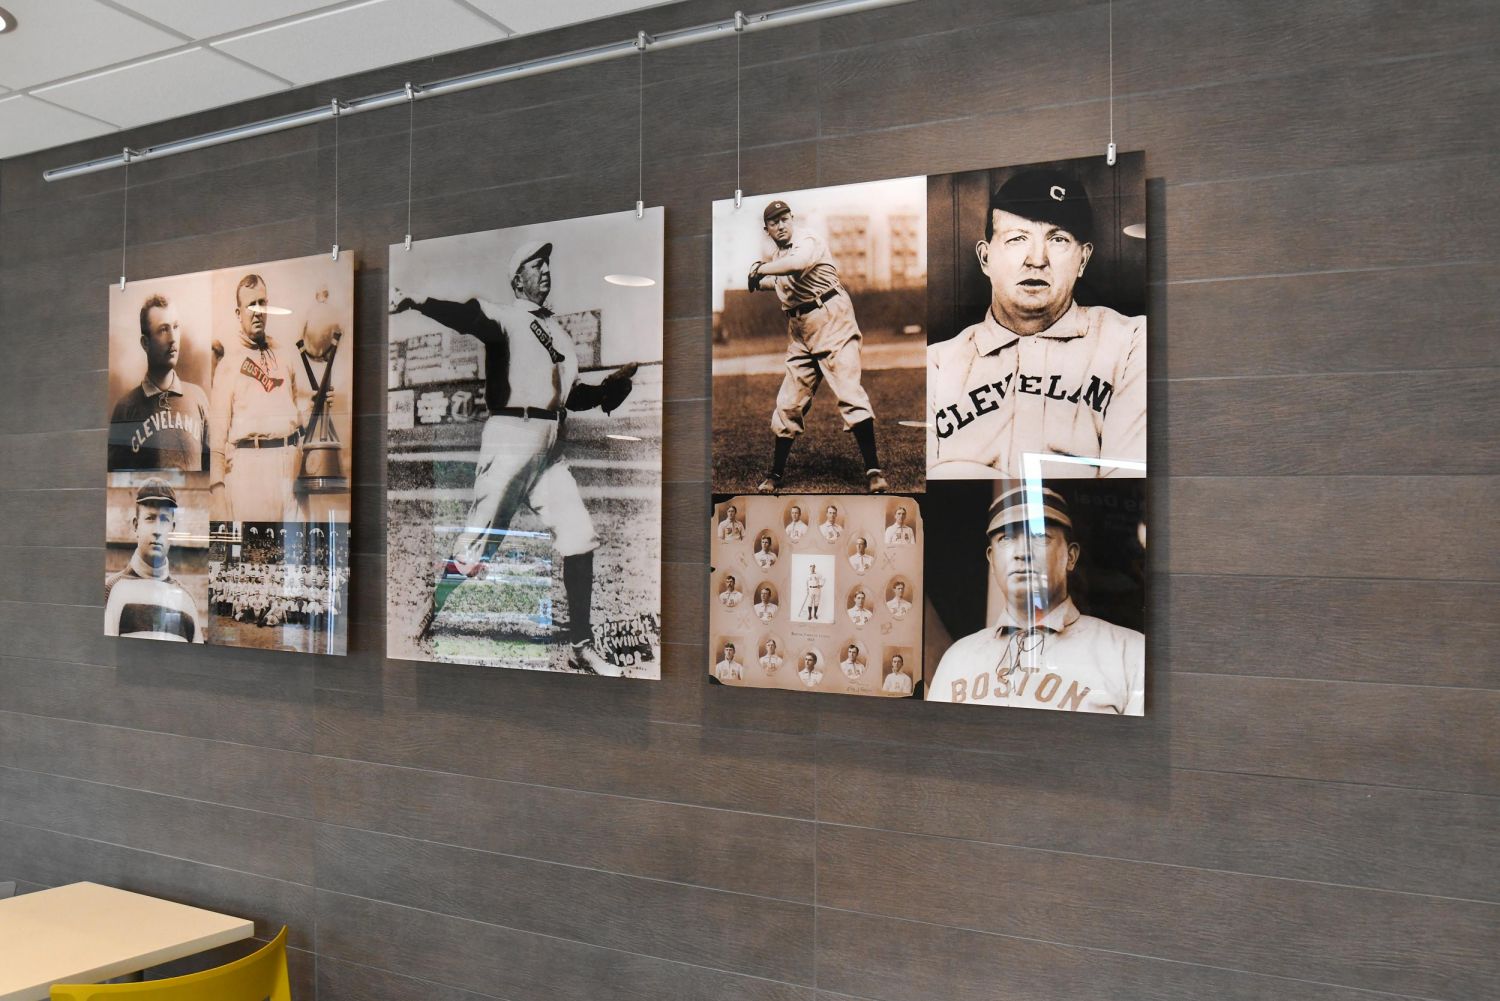 Newcomerstown McDonalds Restaurant Woody Hayes / Cy Young Exhibit